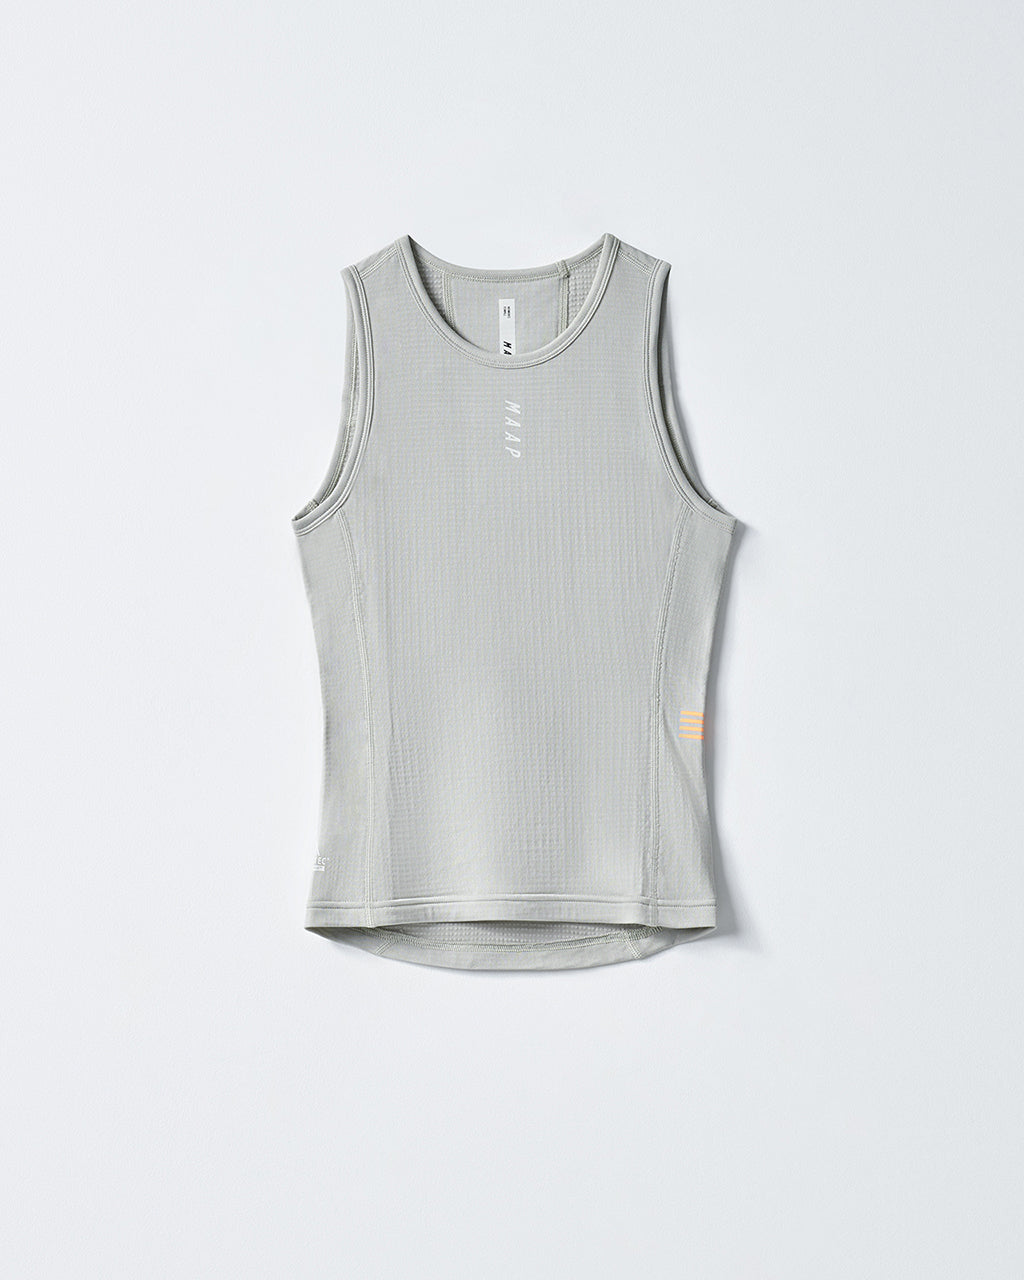 Women's Thermal Base Layer Vest